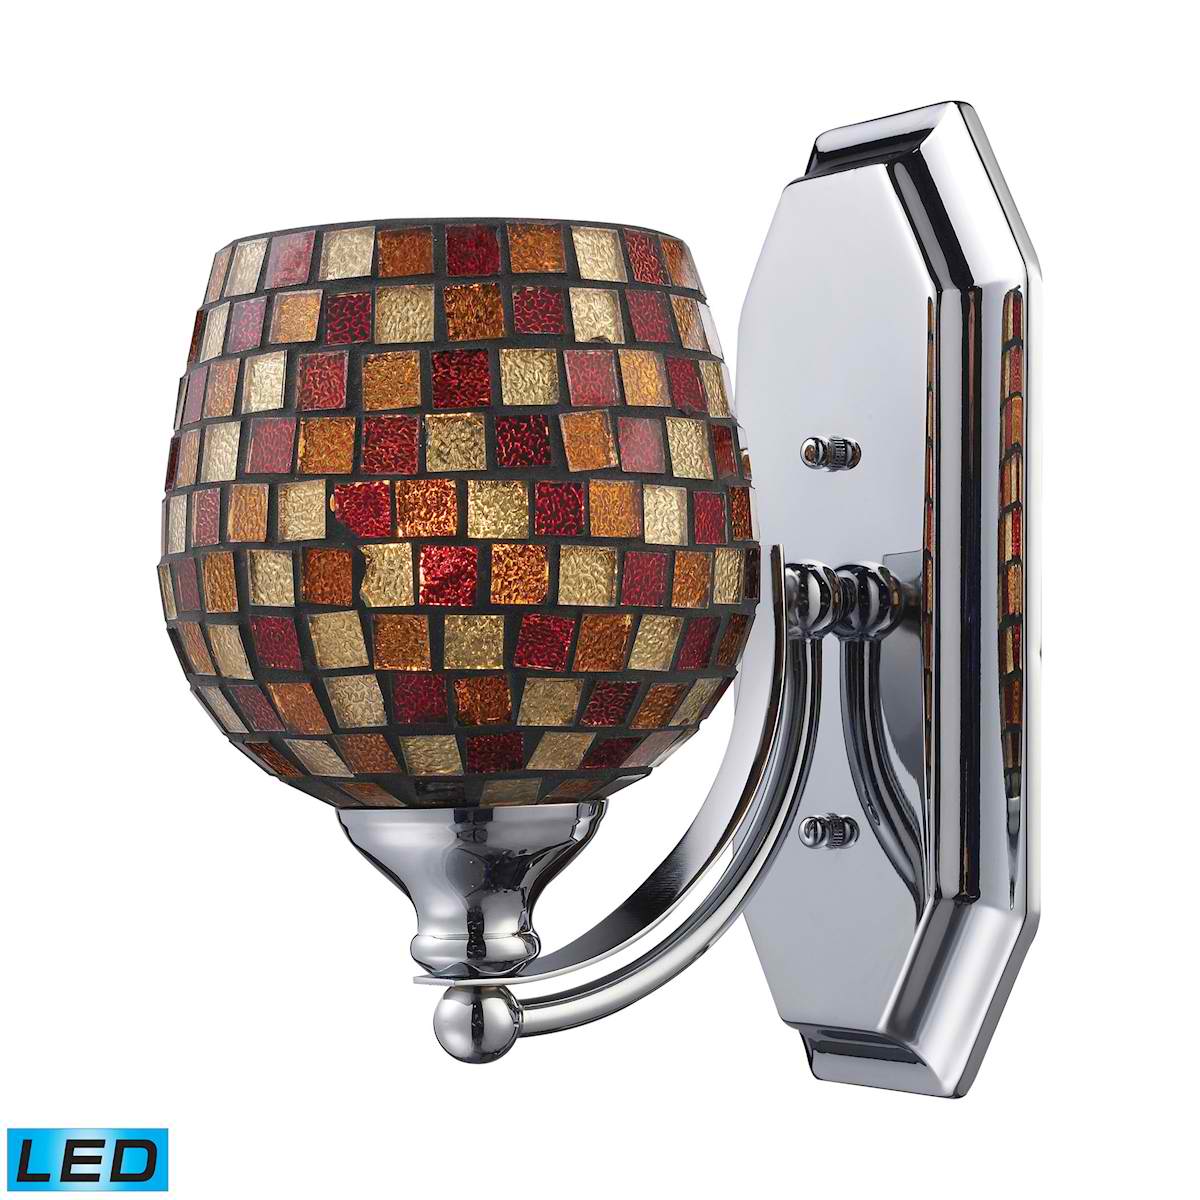 1 Light Vanity in Polished Chrome and Multi Mosaic Glass - LED Offering Up To 800 Lumens (60 Watt Equivalent)